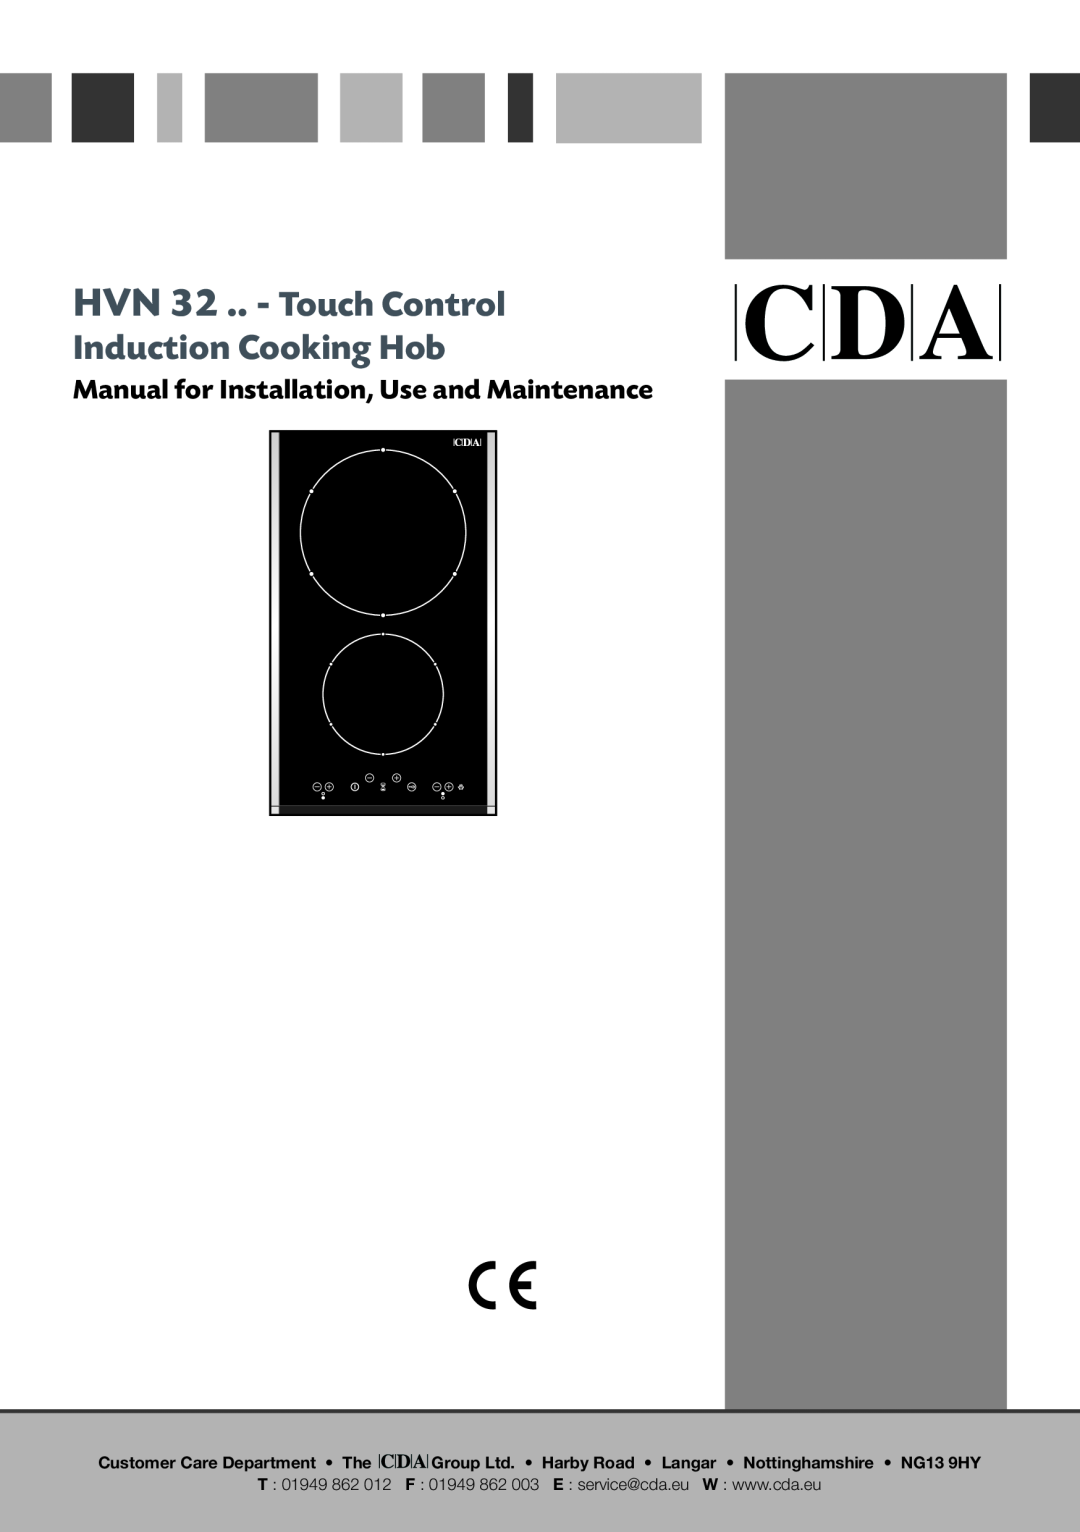 CDA manual HVN 32 .. - Touch Control Induction Cooking Hob, Manual for Installation, Use and Maintenance 